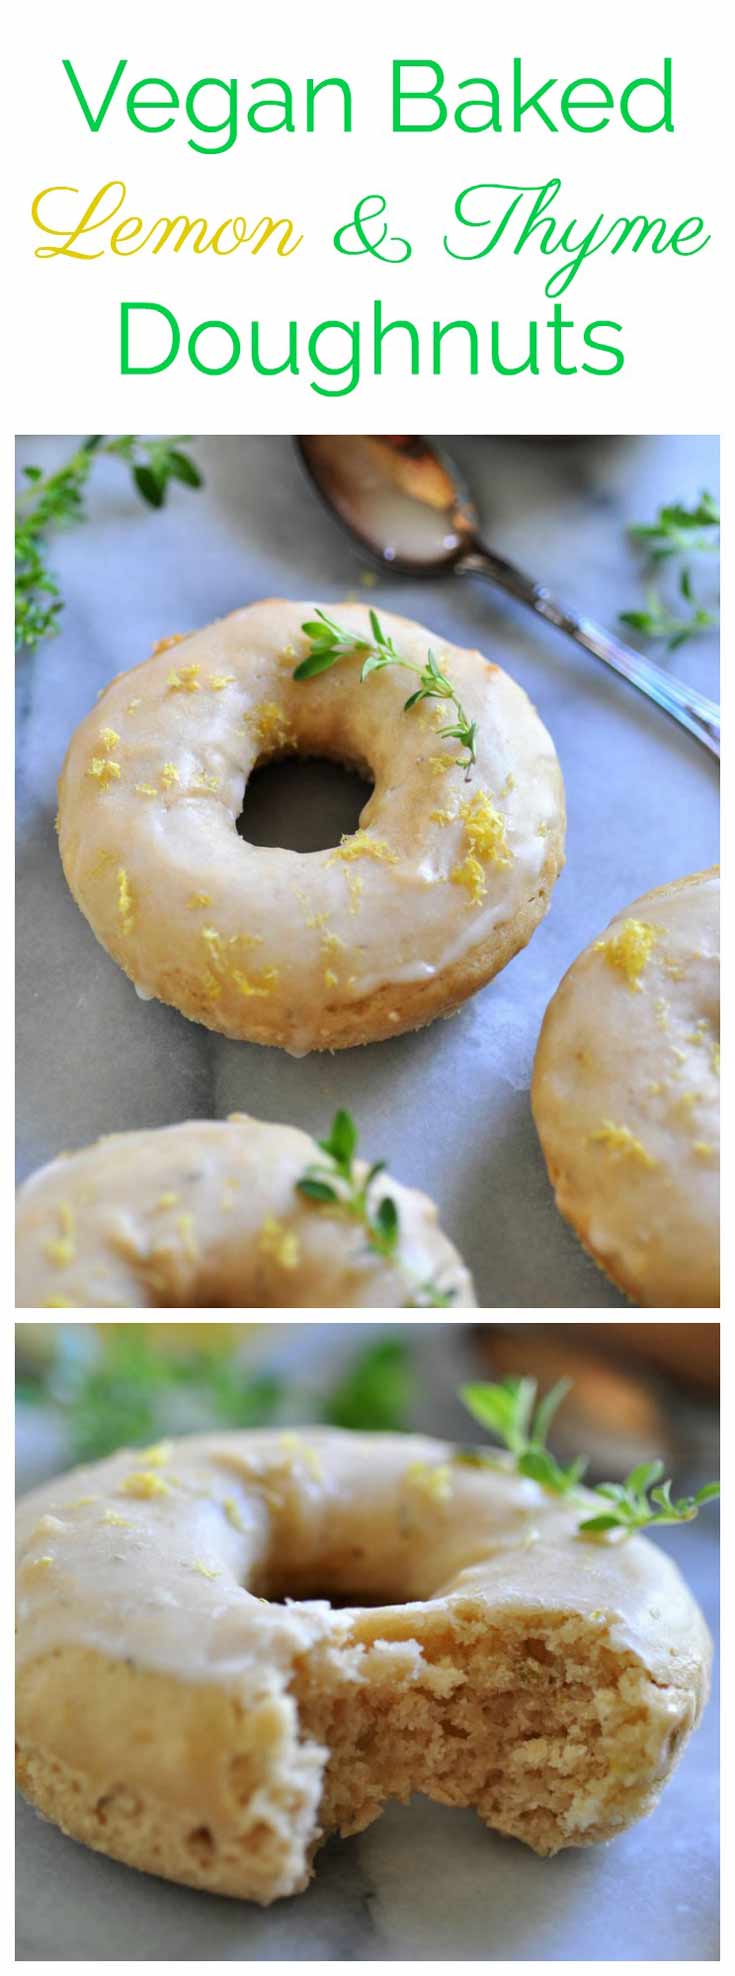 The perfect vegan doughnut recipe! Baked and bursting with the flavors of lemon & thyme!